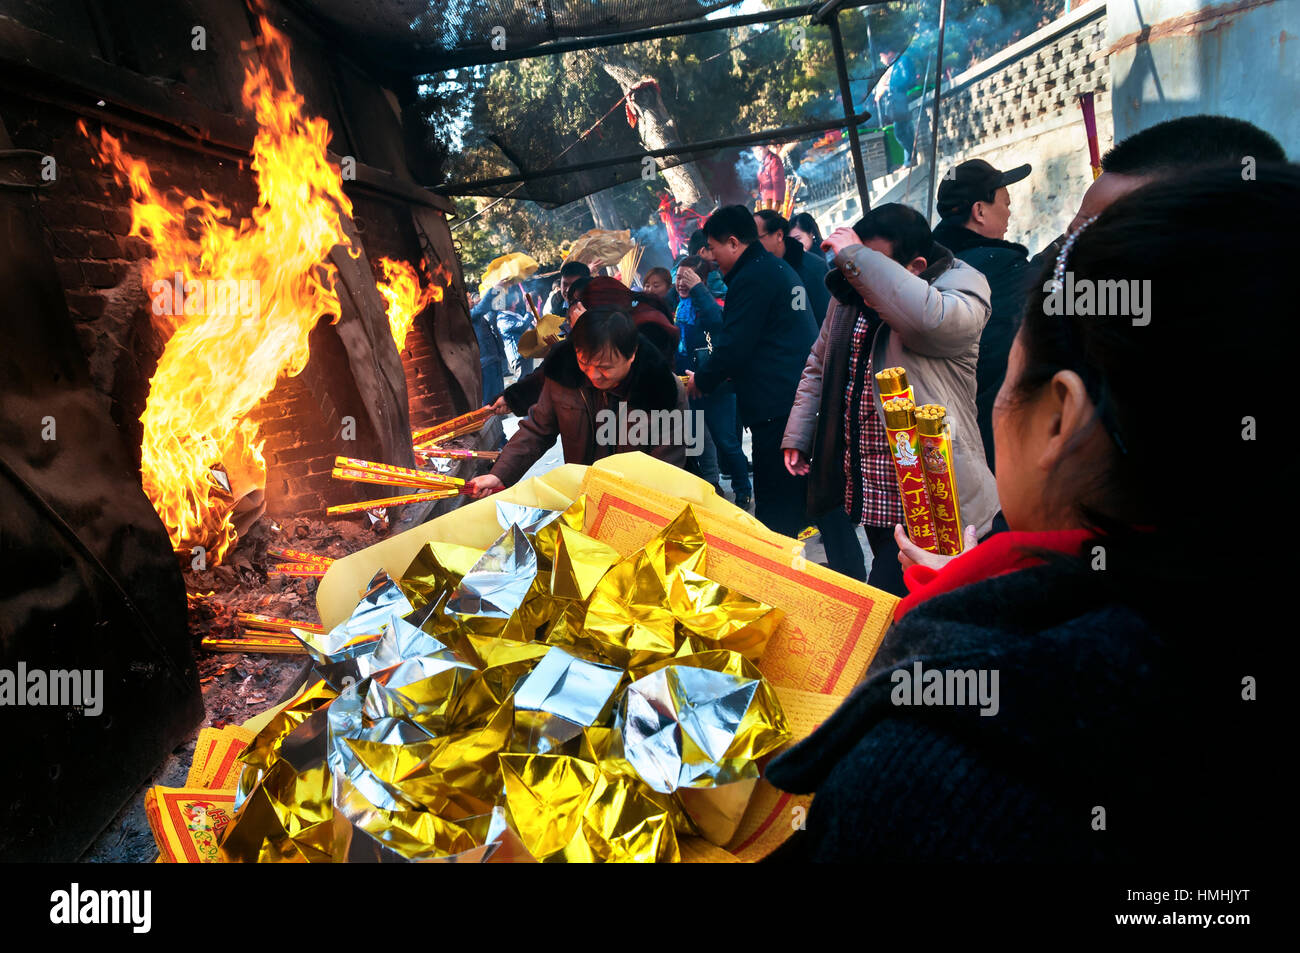 TAISHAN, CHINA - JAN 1, 2014 - Worshippers burning joss paper at a temple on Taishan mountain, China, wishing for good fortune for the new year Stock Photo